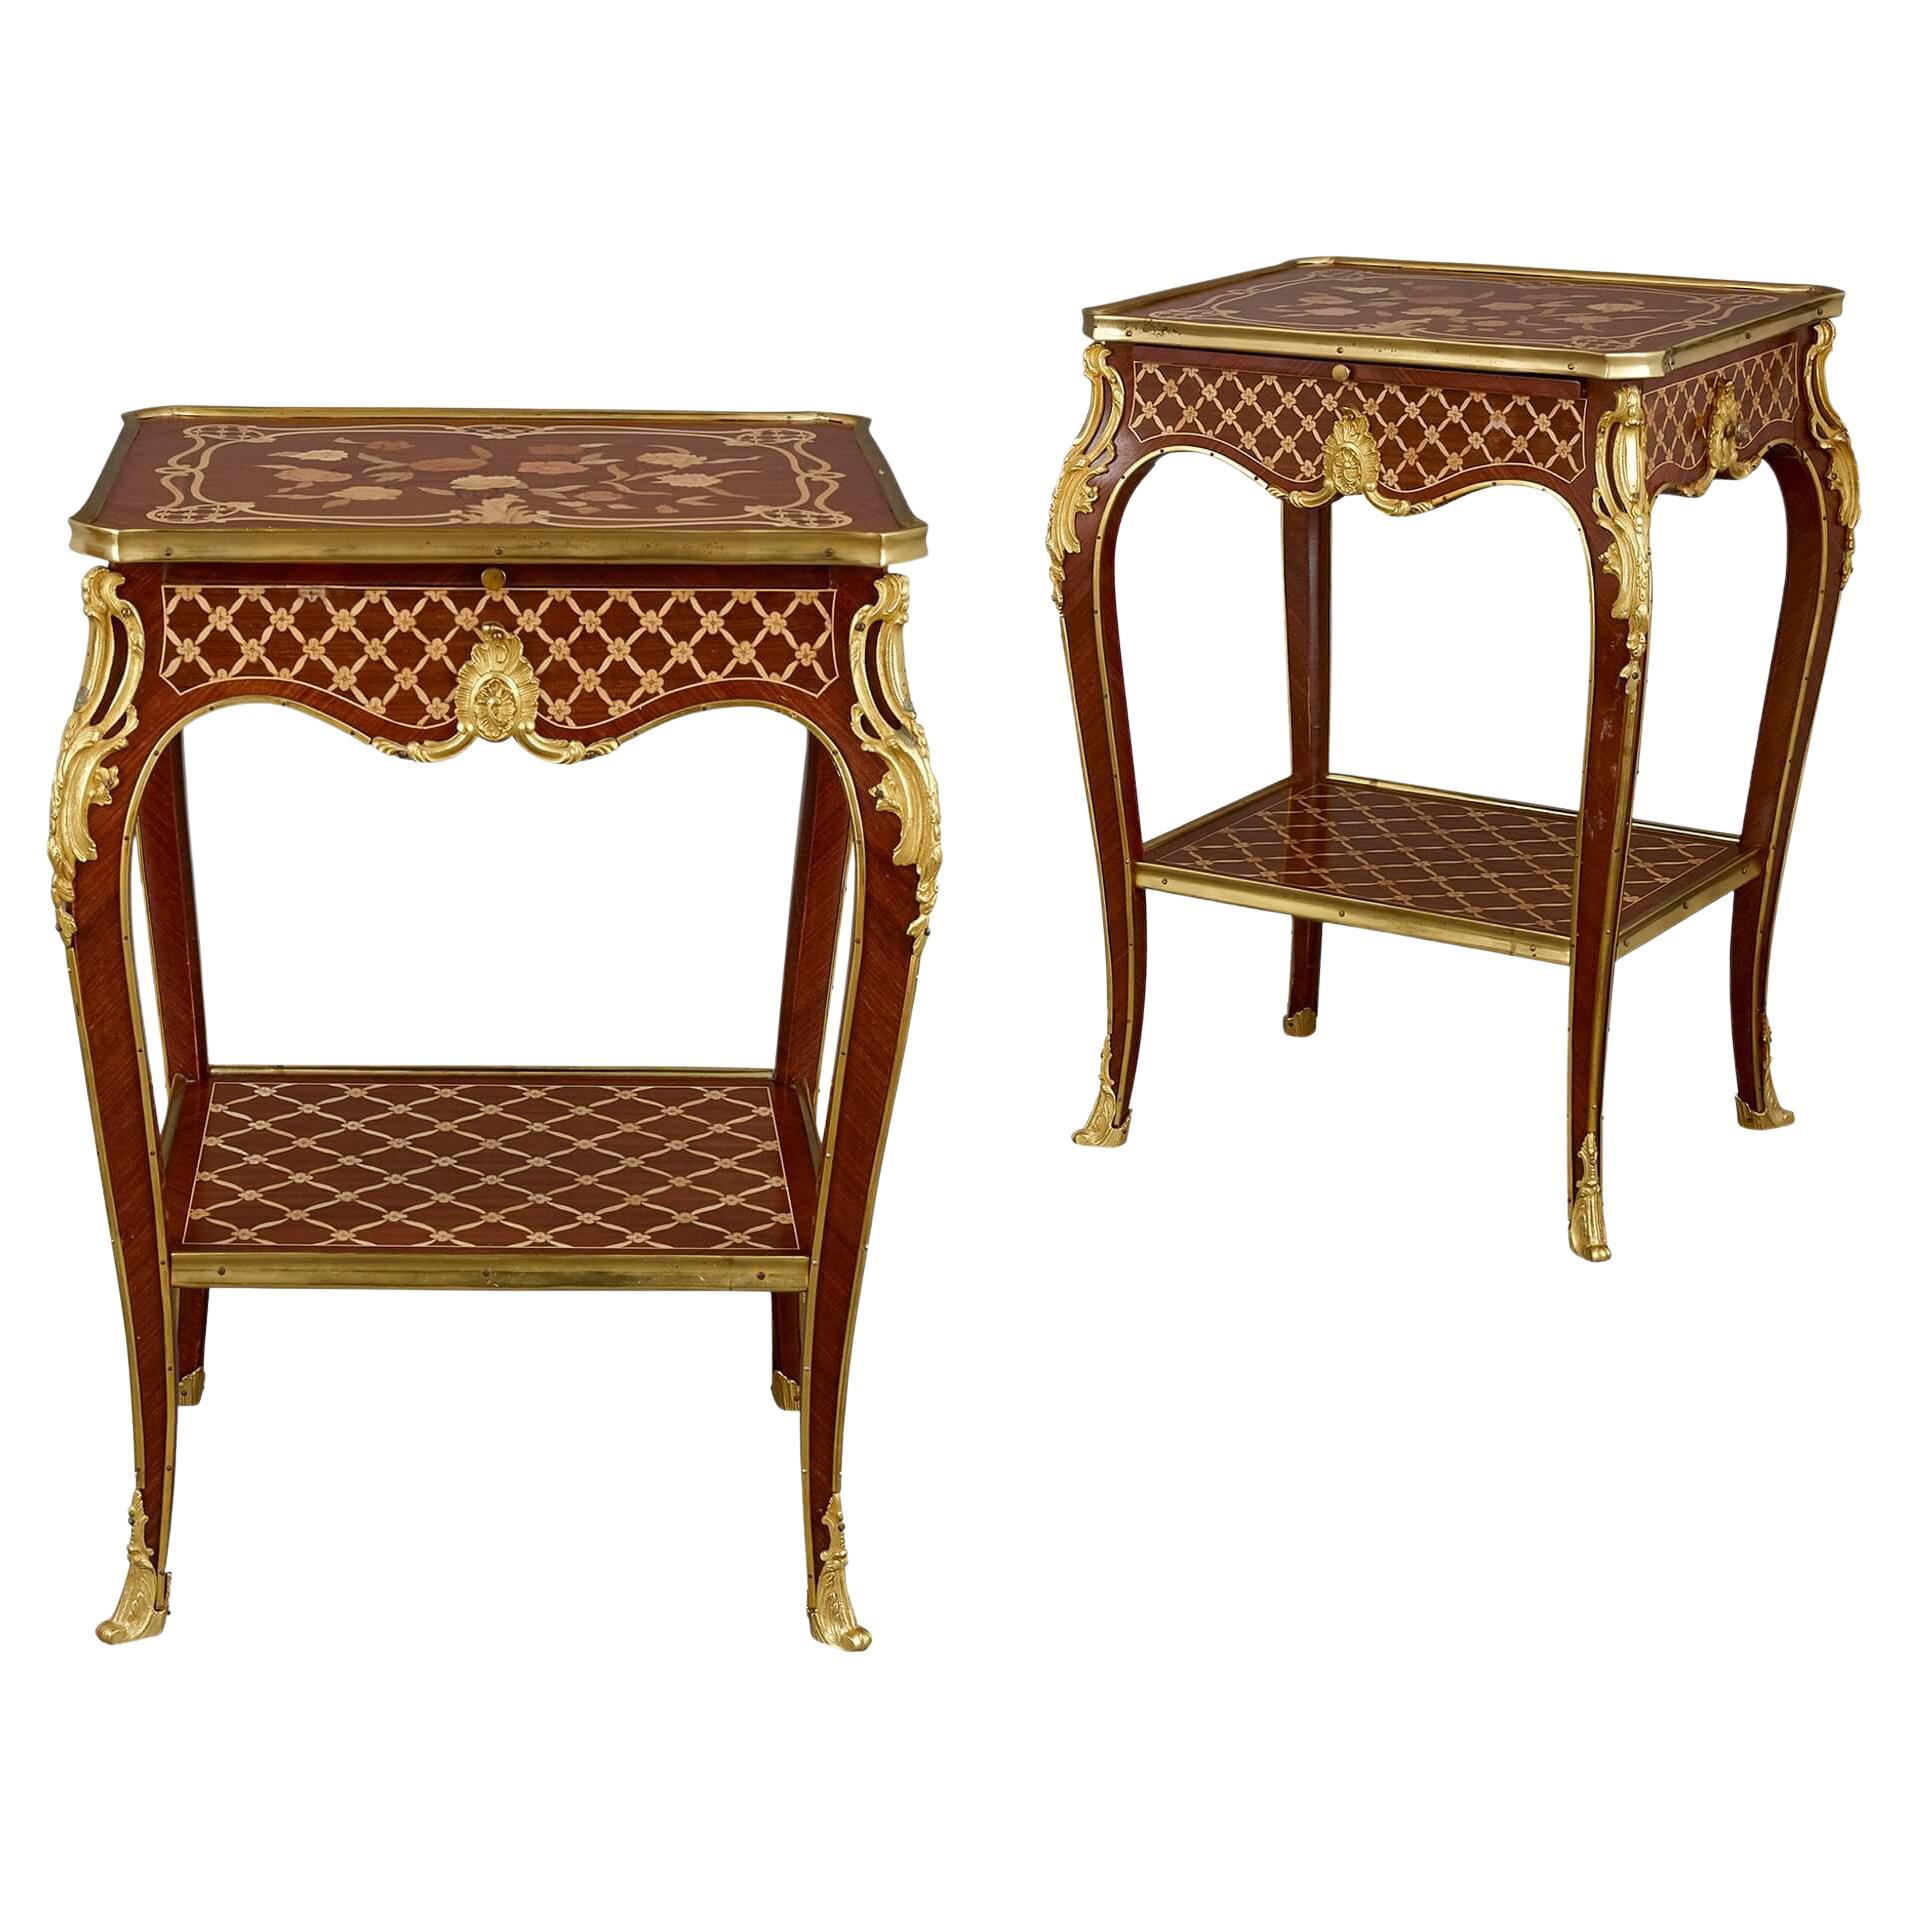 Pair of Louis XV Style Ormolu Mounted Marquetry and Parquetry Side Tables For Sale